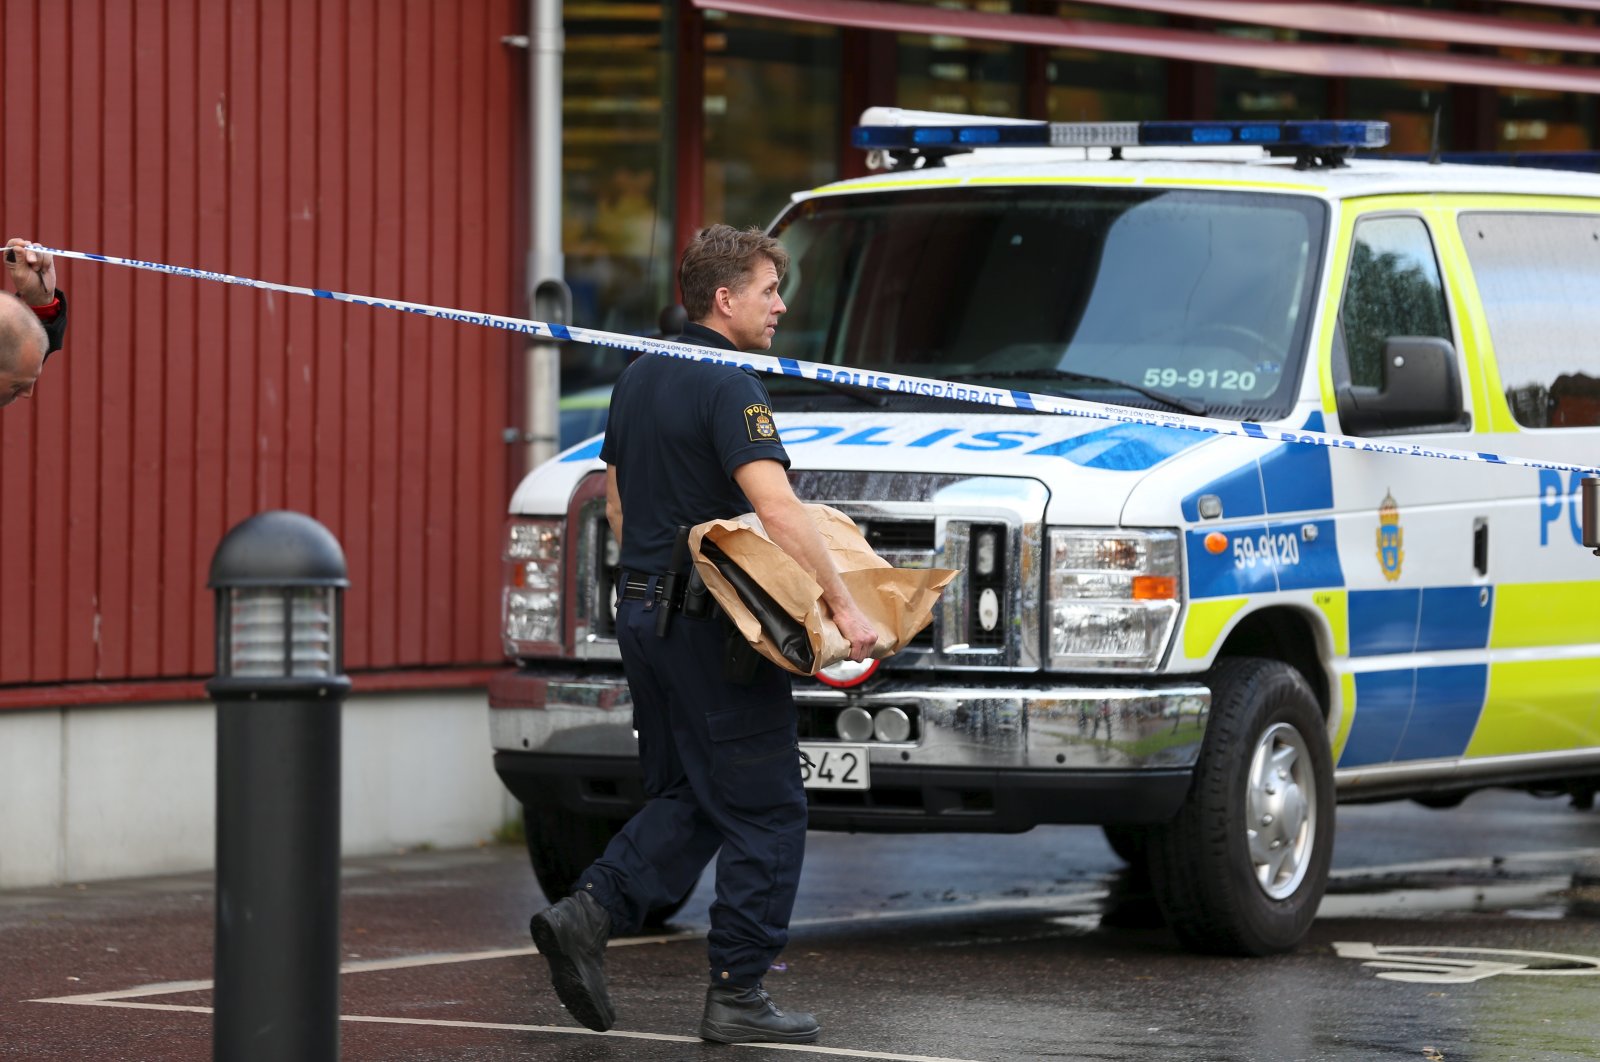 A police officer carries an evidence bag as he leaves a crime scene in Trollhattan, western Sweden Oct. 22, 2015. (Reuters File Photo)